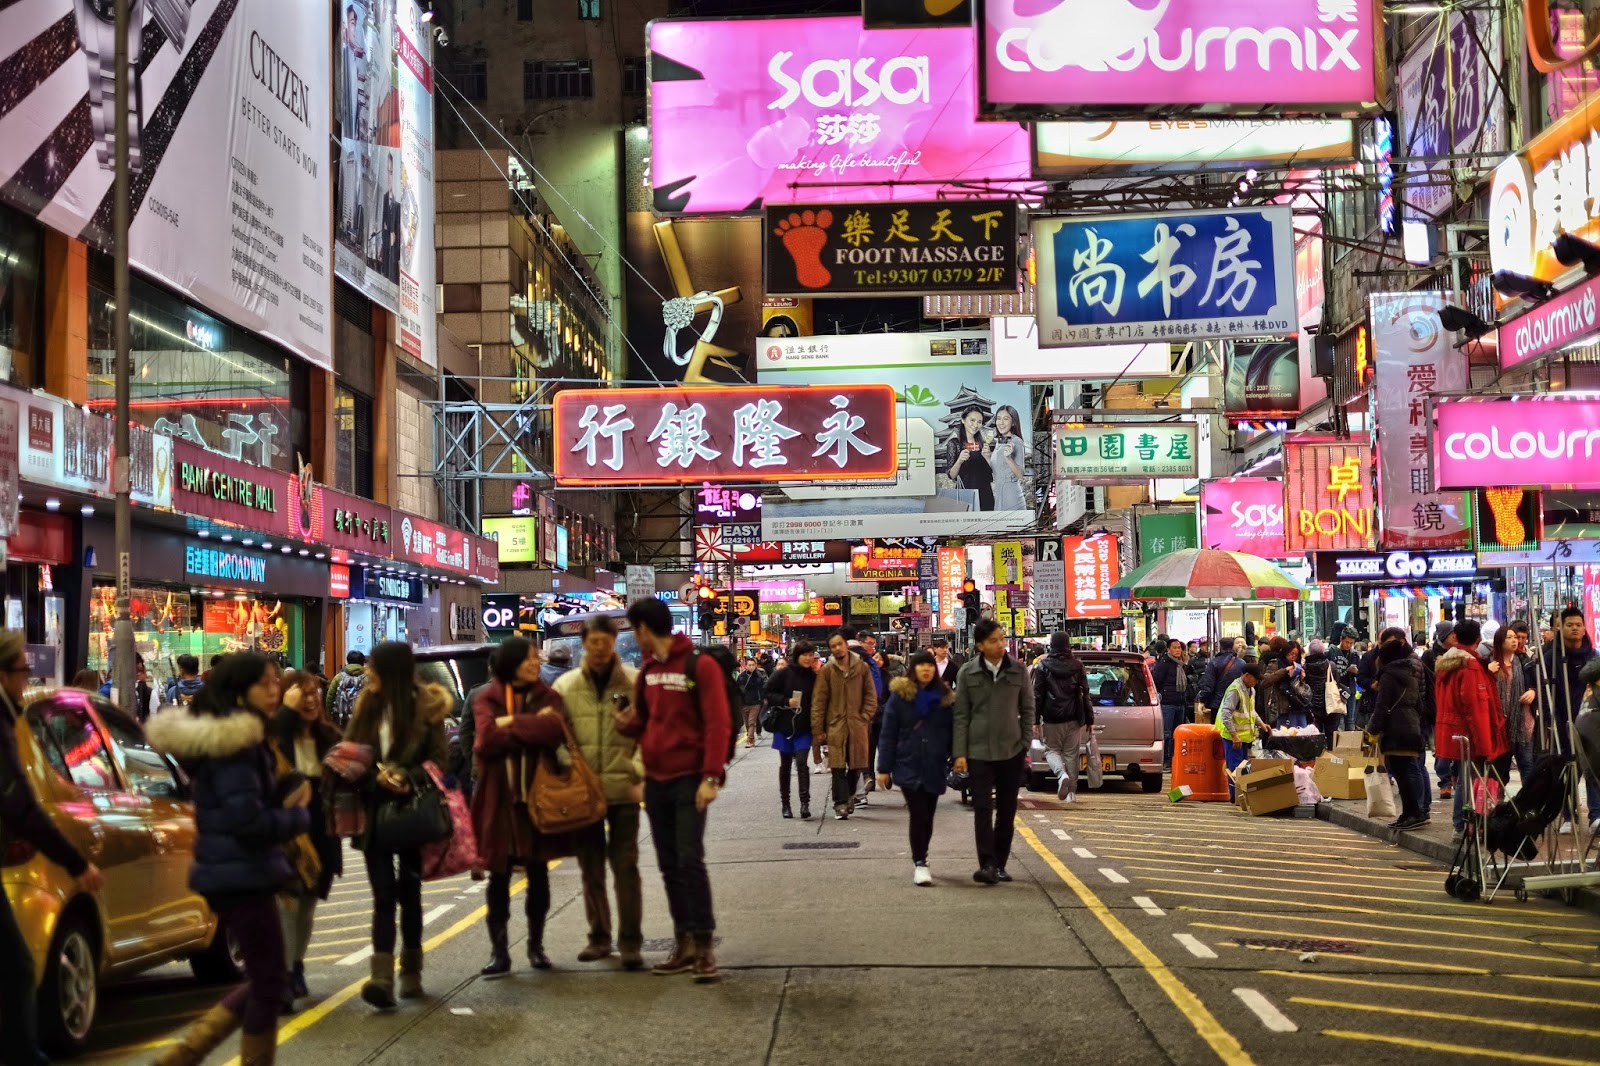 12 Things To Do In Kowloon To Please Your Senses In Hong Kong!